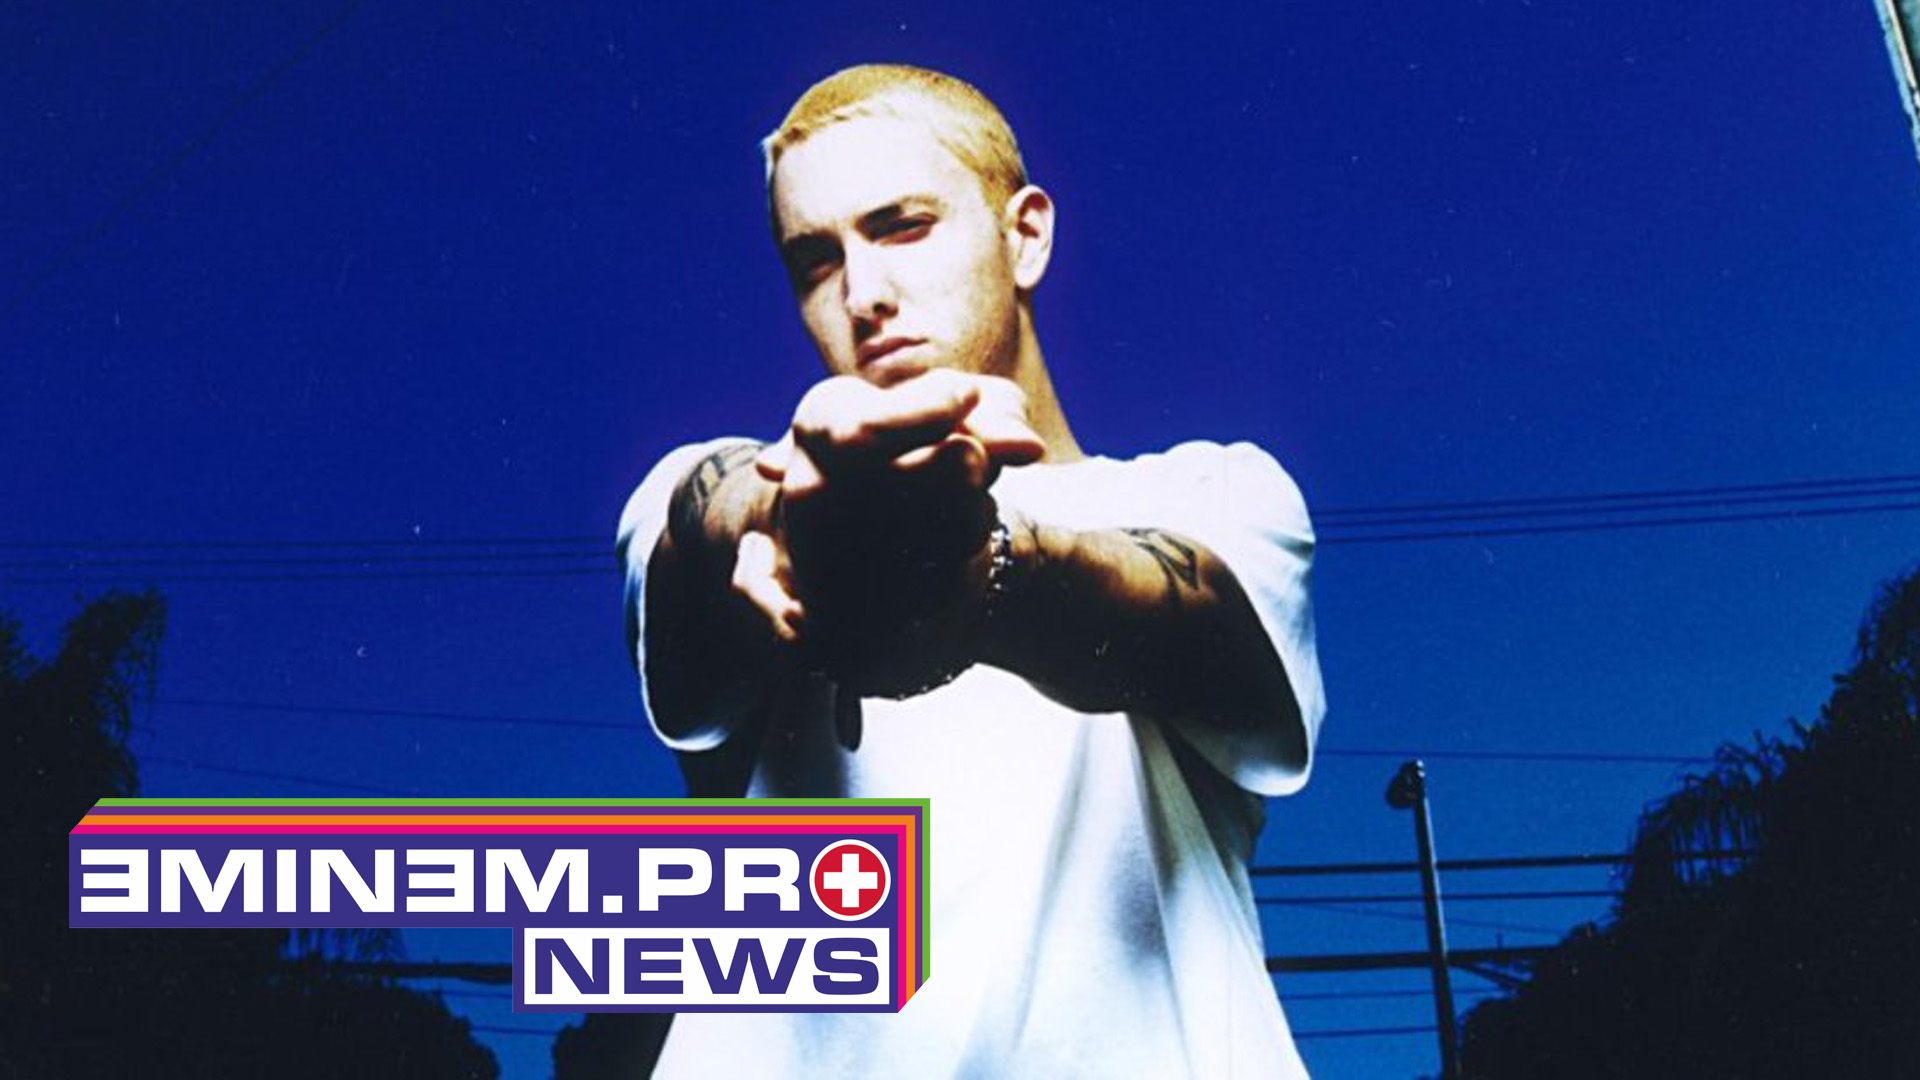 Full list of people Eminem mentioned or dissed on his studio albums